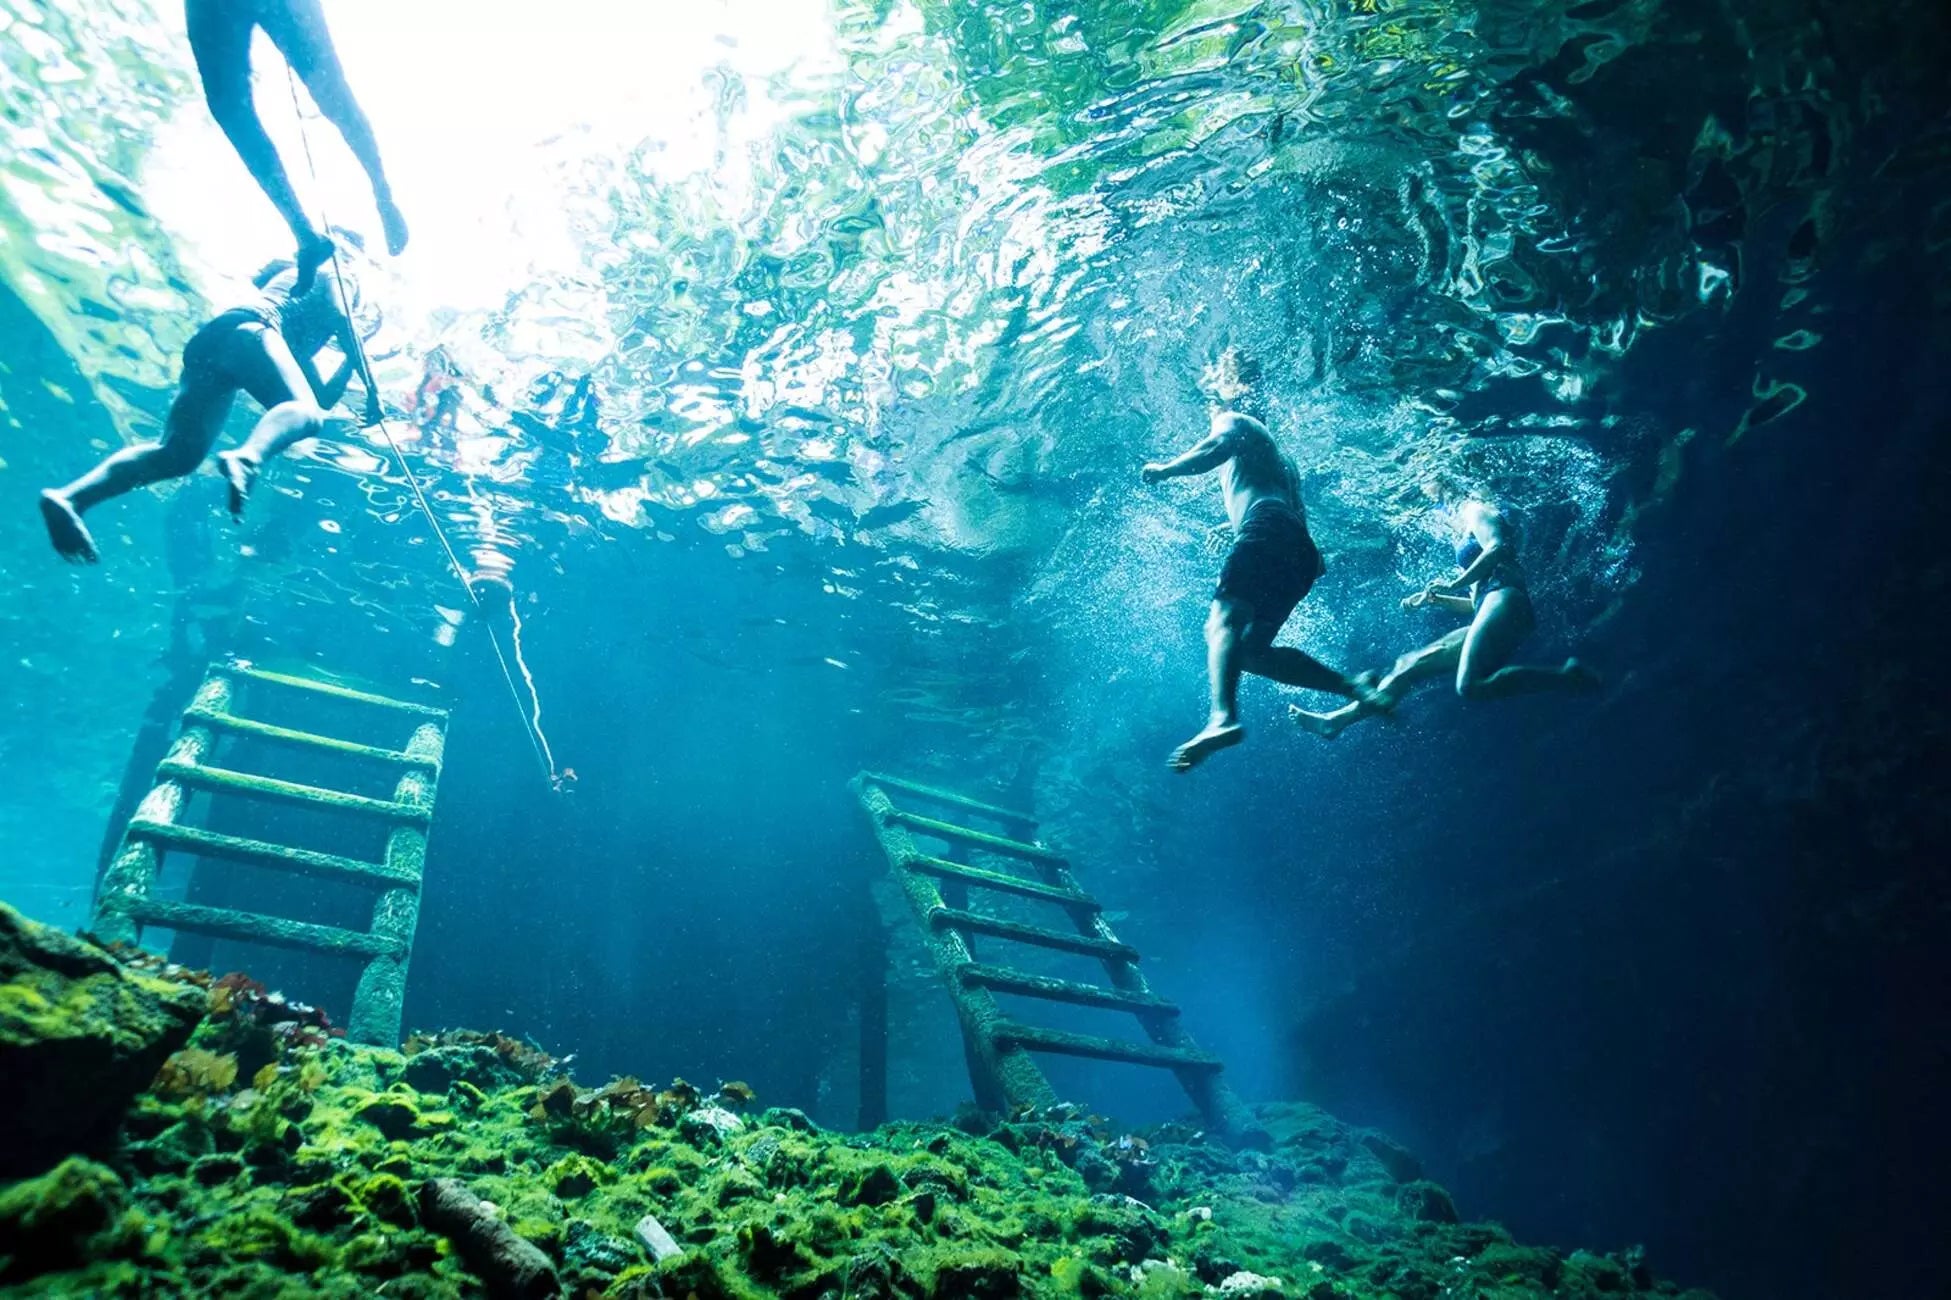 Dive into the Aquatic Explosion Tulum Adventure! 🚀🌟 Experience mind-blowing aquatic thrills – zipline into refreshing waters, rappel down vertical walls, conquer rugged terrains on ATVs, immerse in Mayan culture, and explore a mysterious cave cenote. Unforgettable day from Playa del Carmen and Tulum! 🏜️🪢🏊‍♂️🚵‍♀️ #AquaticExplosion #ZiplinesAndATVs #MayanCeremony #CaveCenoteExploration